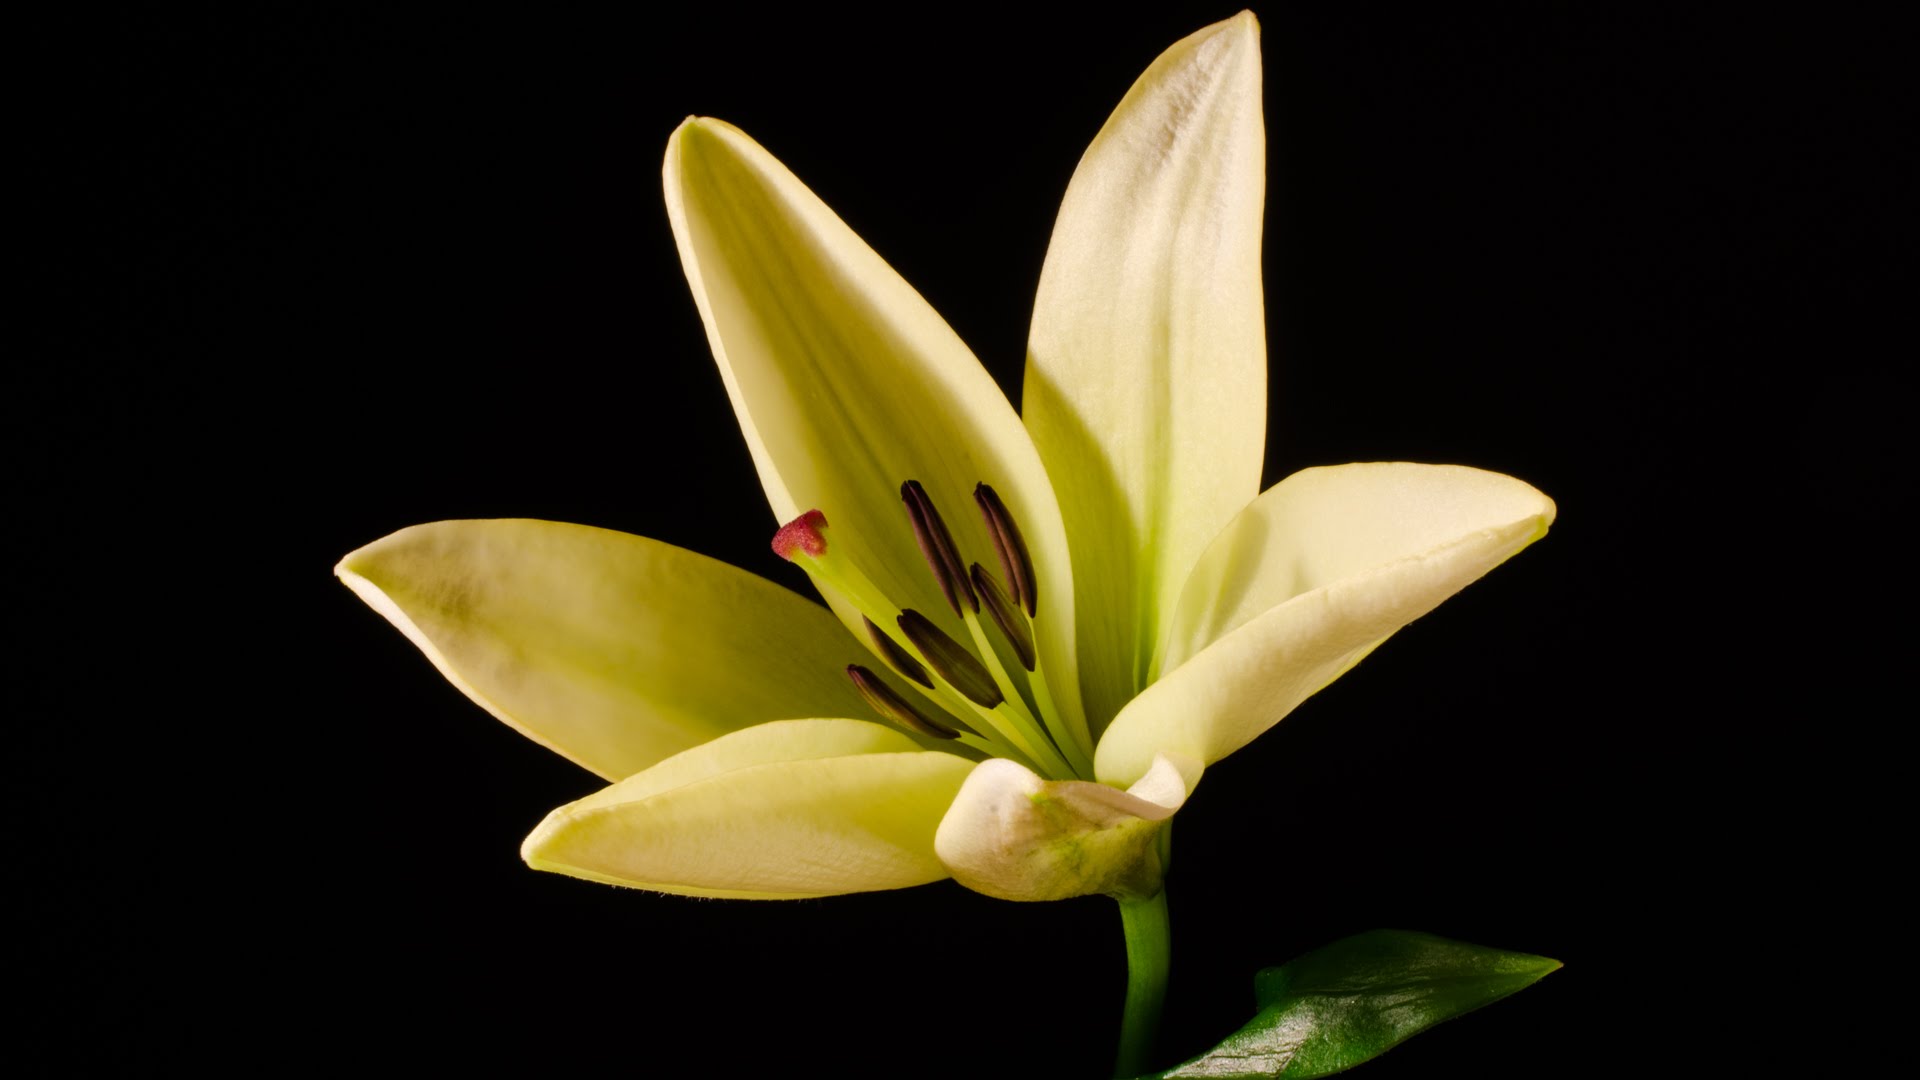 Lily - blooming flower time-lapse video HD - YouTube